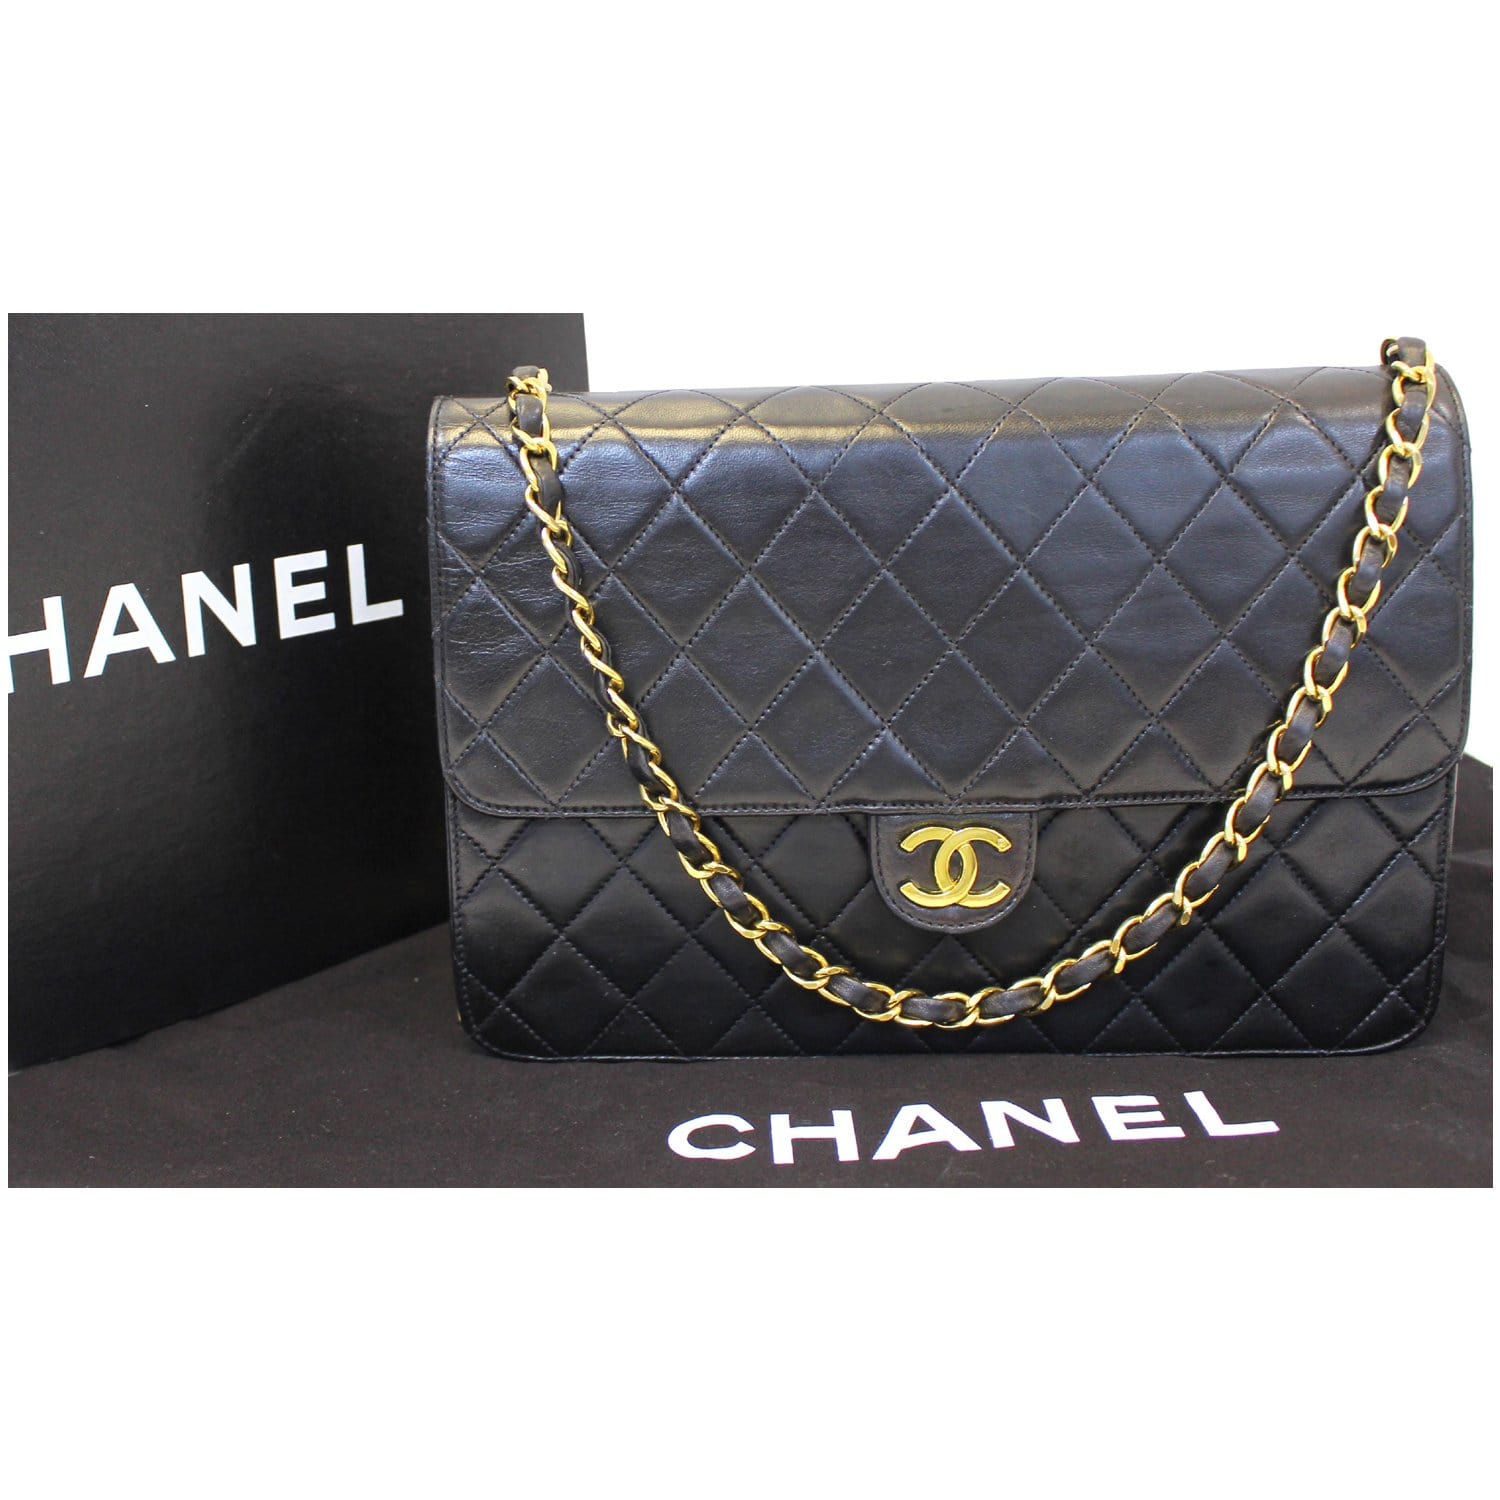 CHANEL, Bags, Vintage Chanel Made In France Authentic Handbag